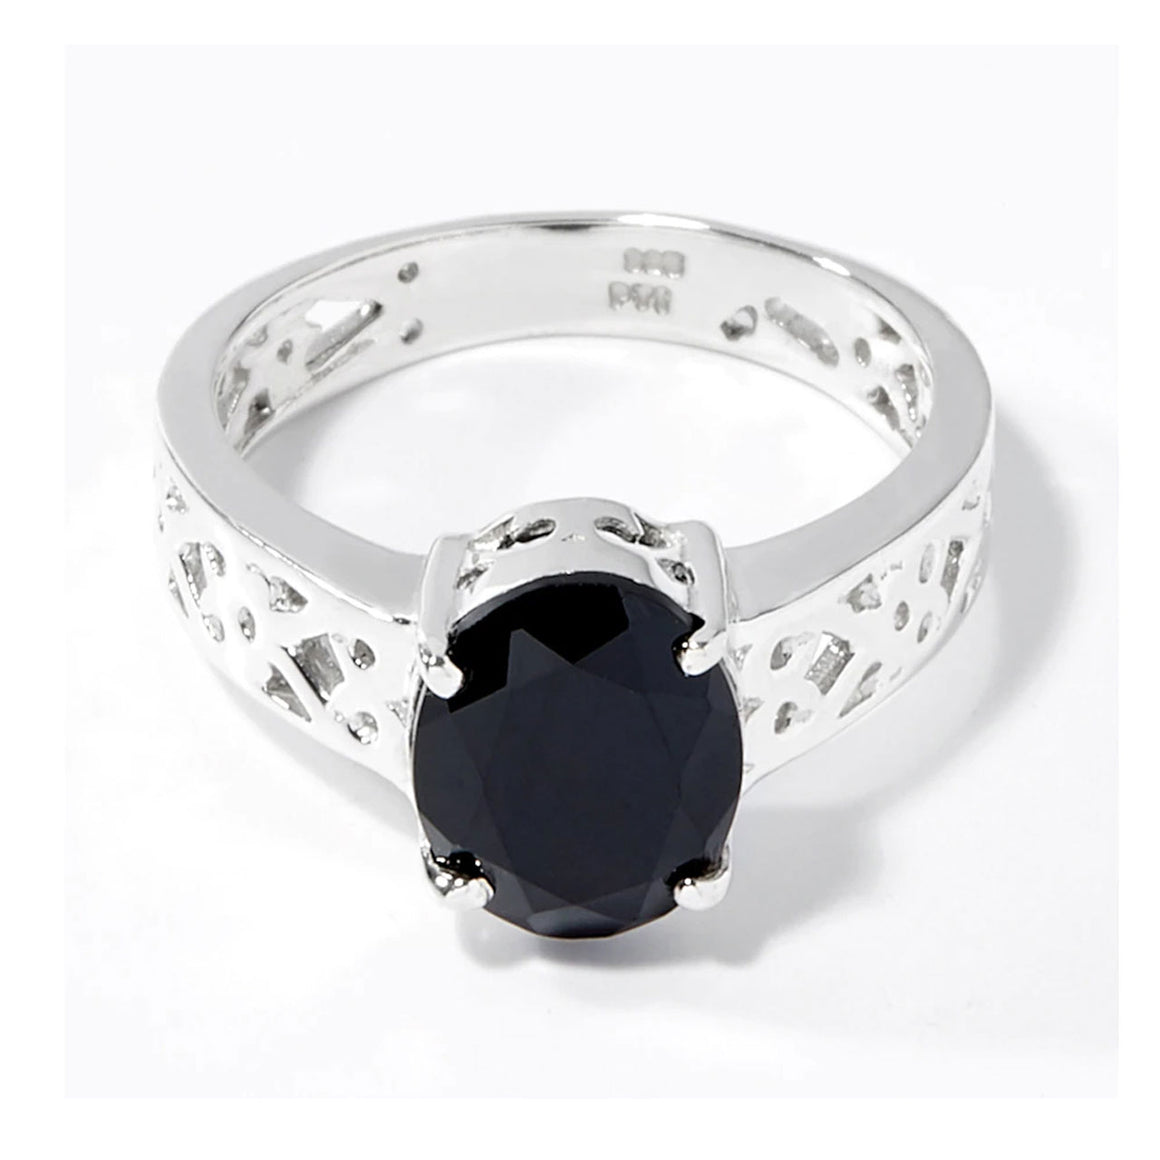 Faceted Oval Black Spinel Scrollwork Ring